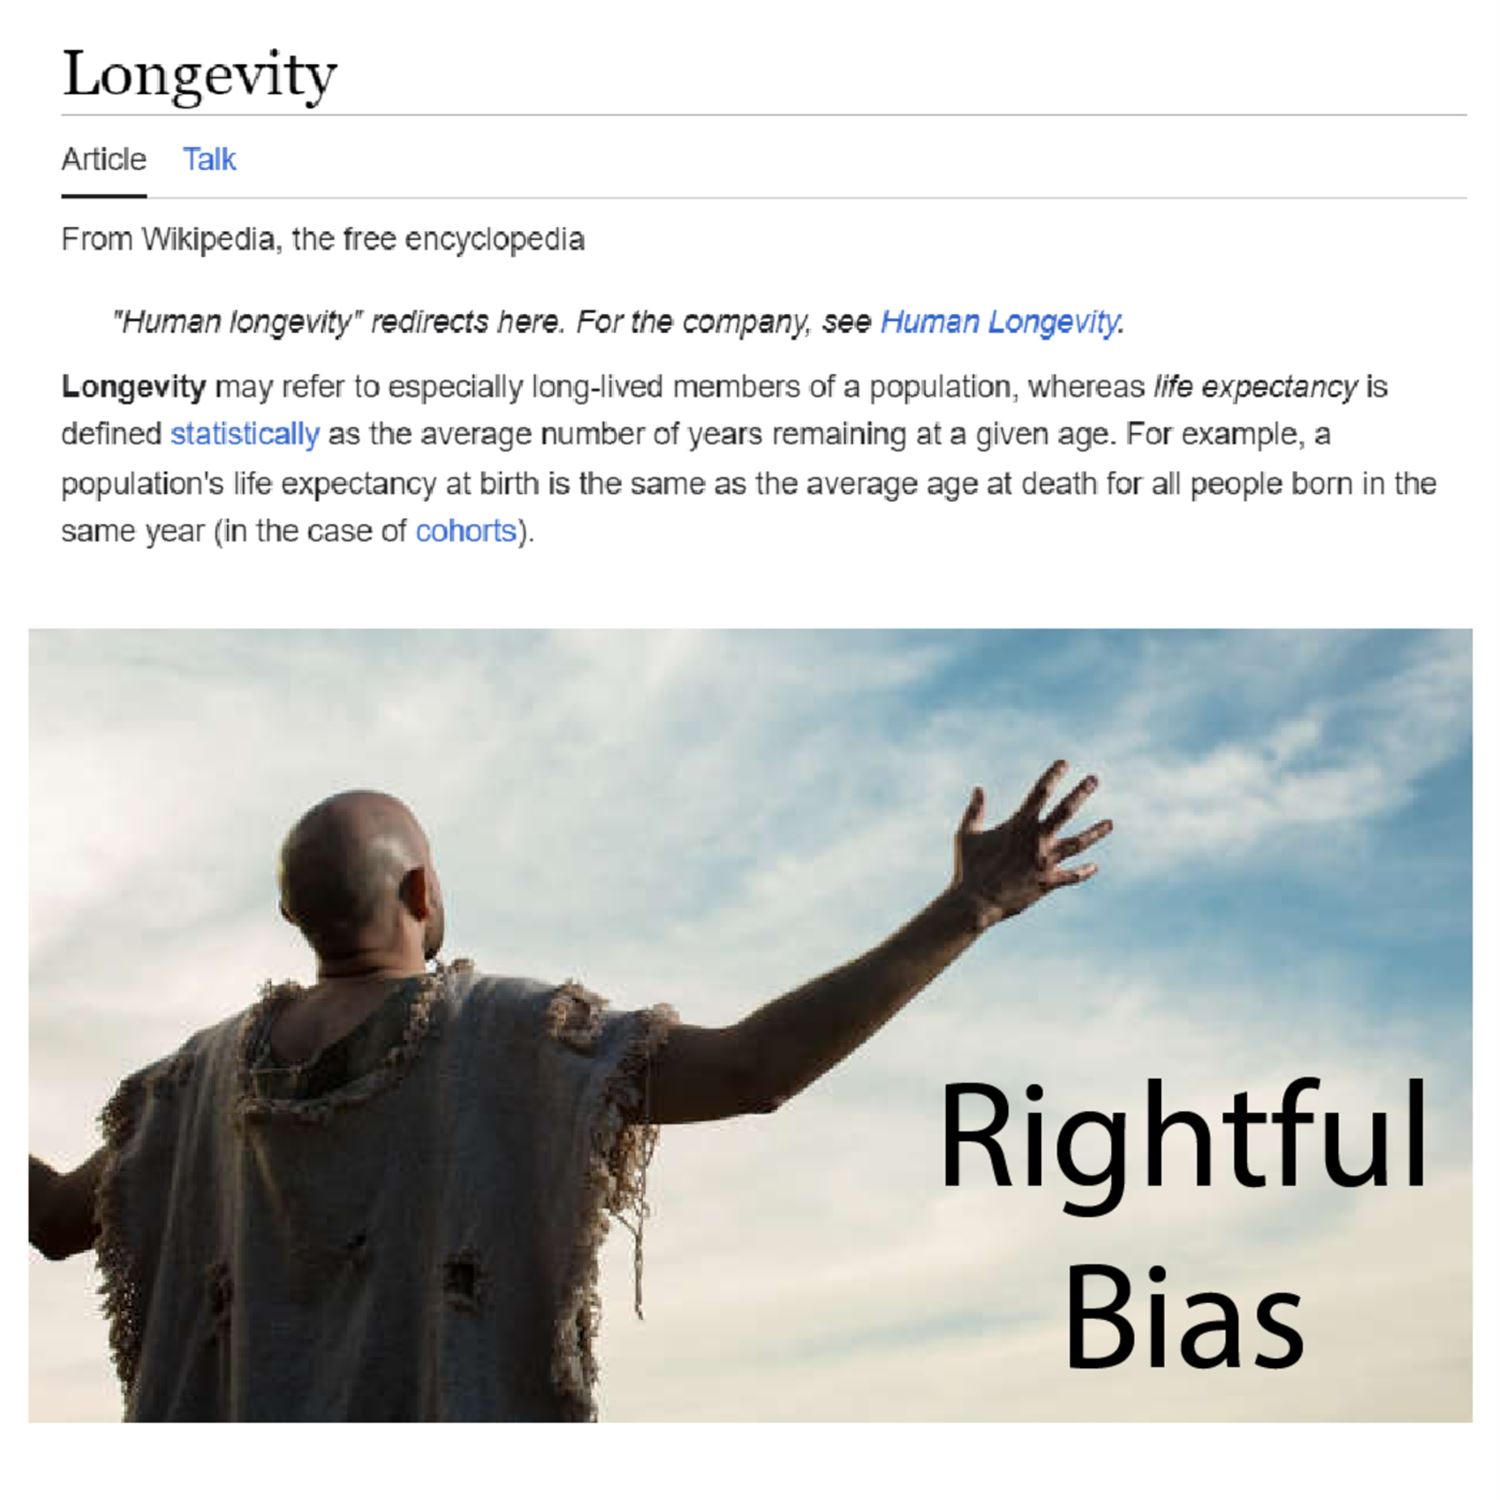 Definition and rightful bias